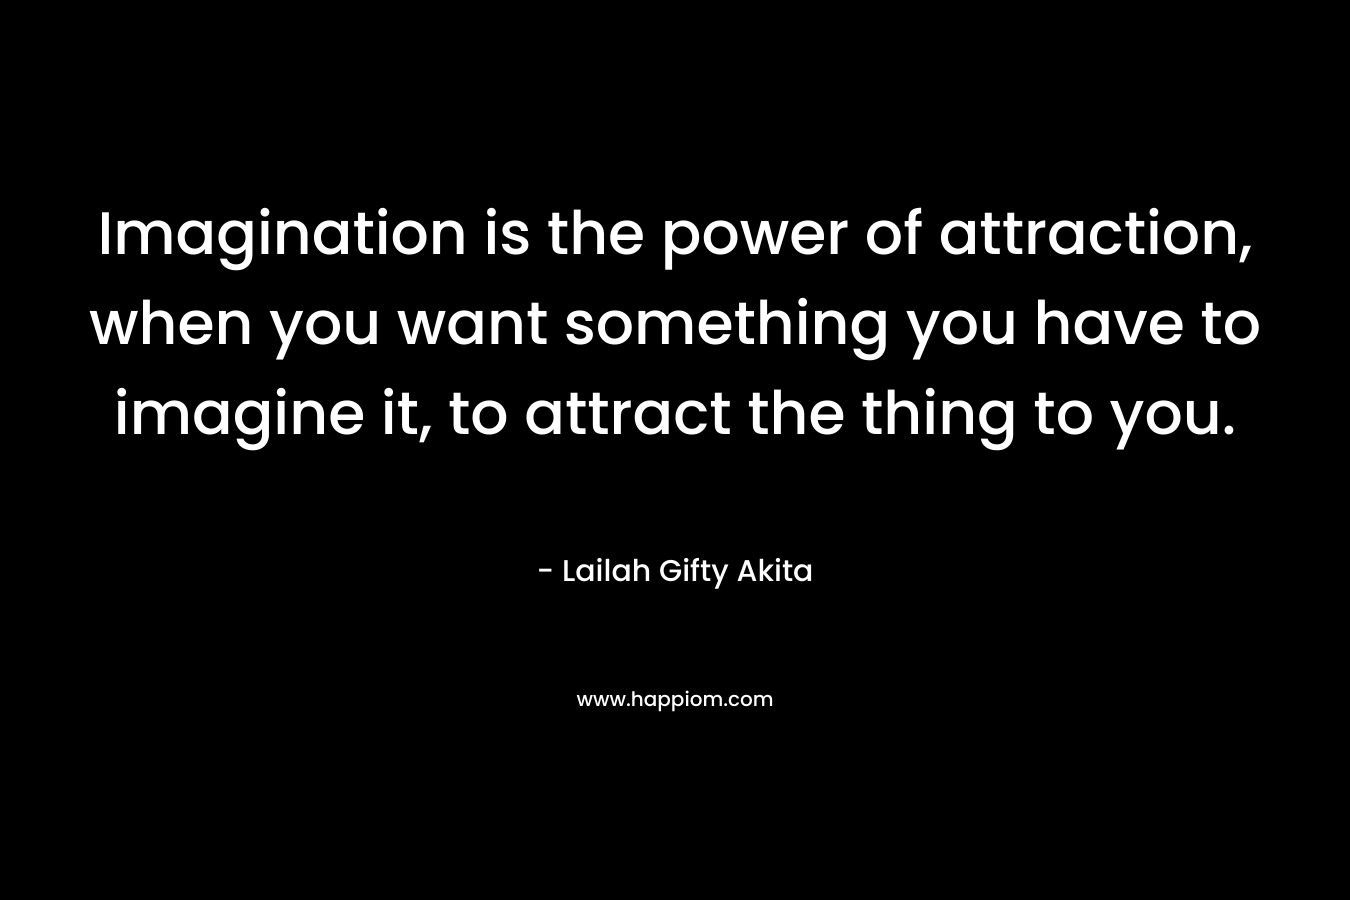 Imagination is the power of attraction, when you want something you have to imagine it, to attract the thing to you.